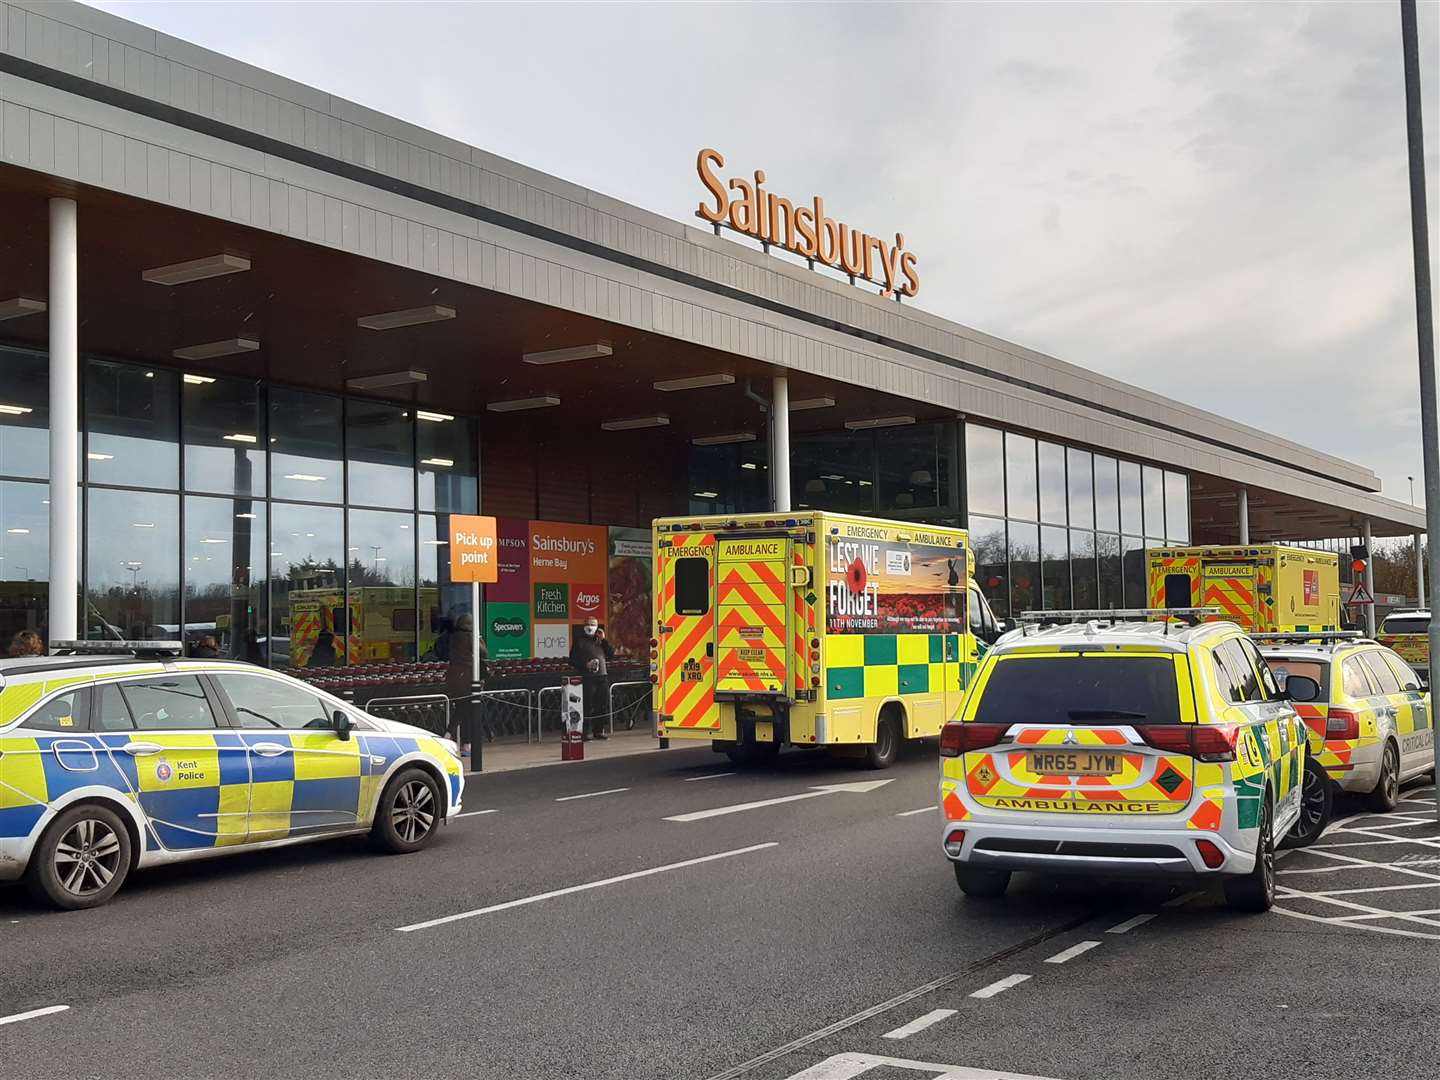 Emergency services were called to Sainsbury's in Herne Bay on Saturday afternoon